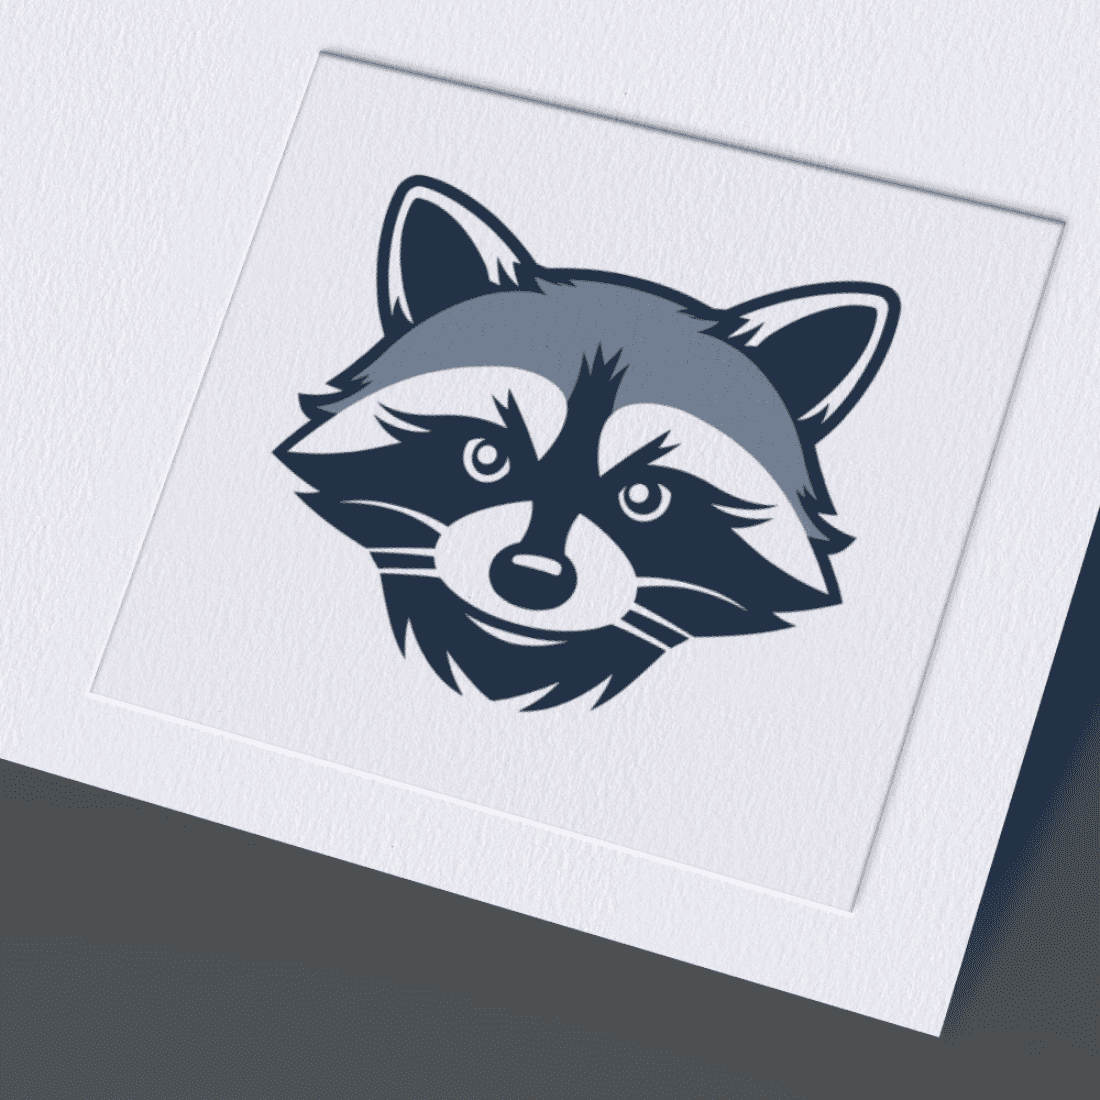 Racoon Logo cover image.